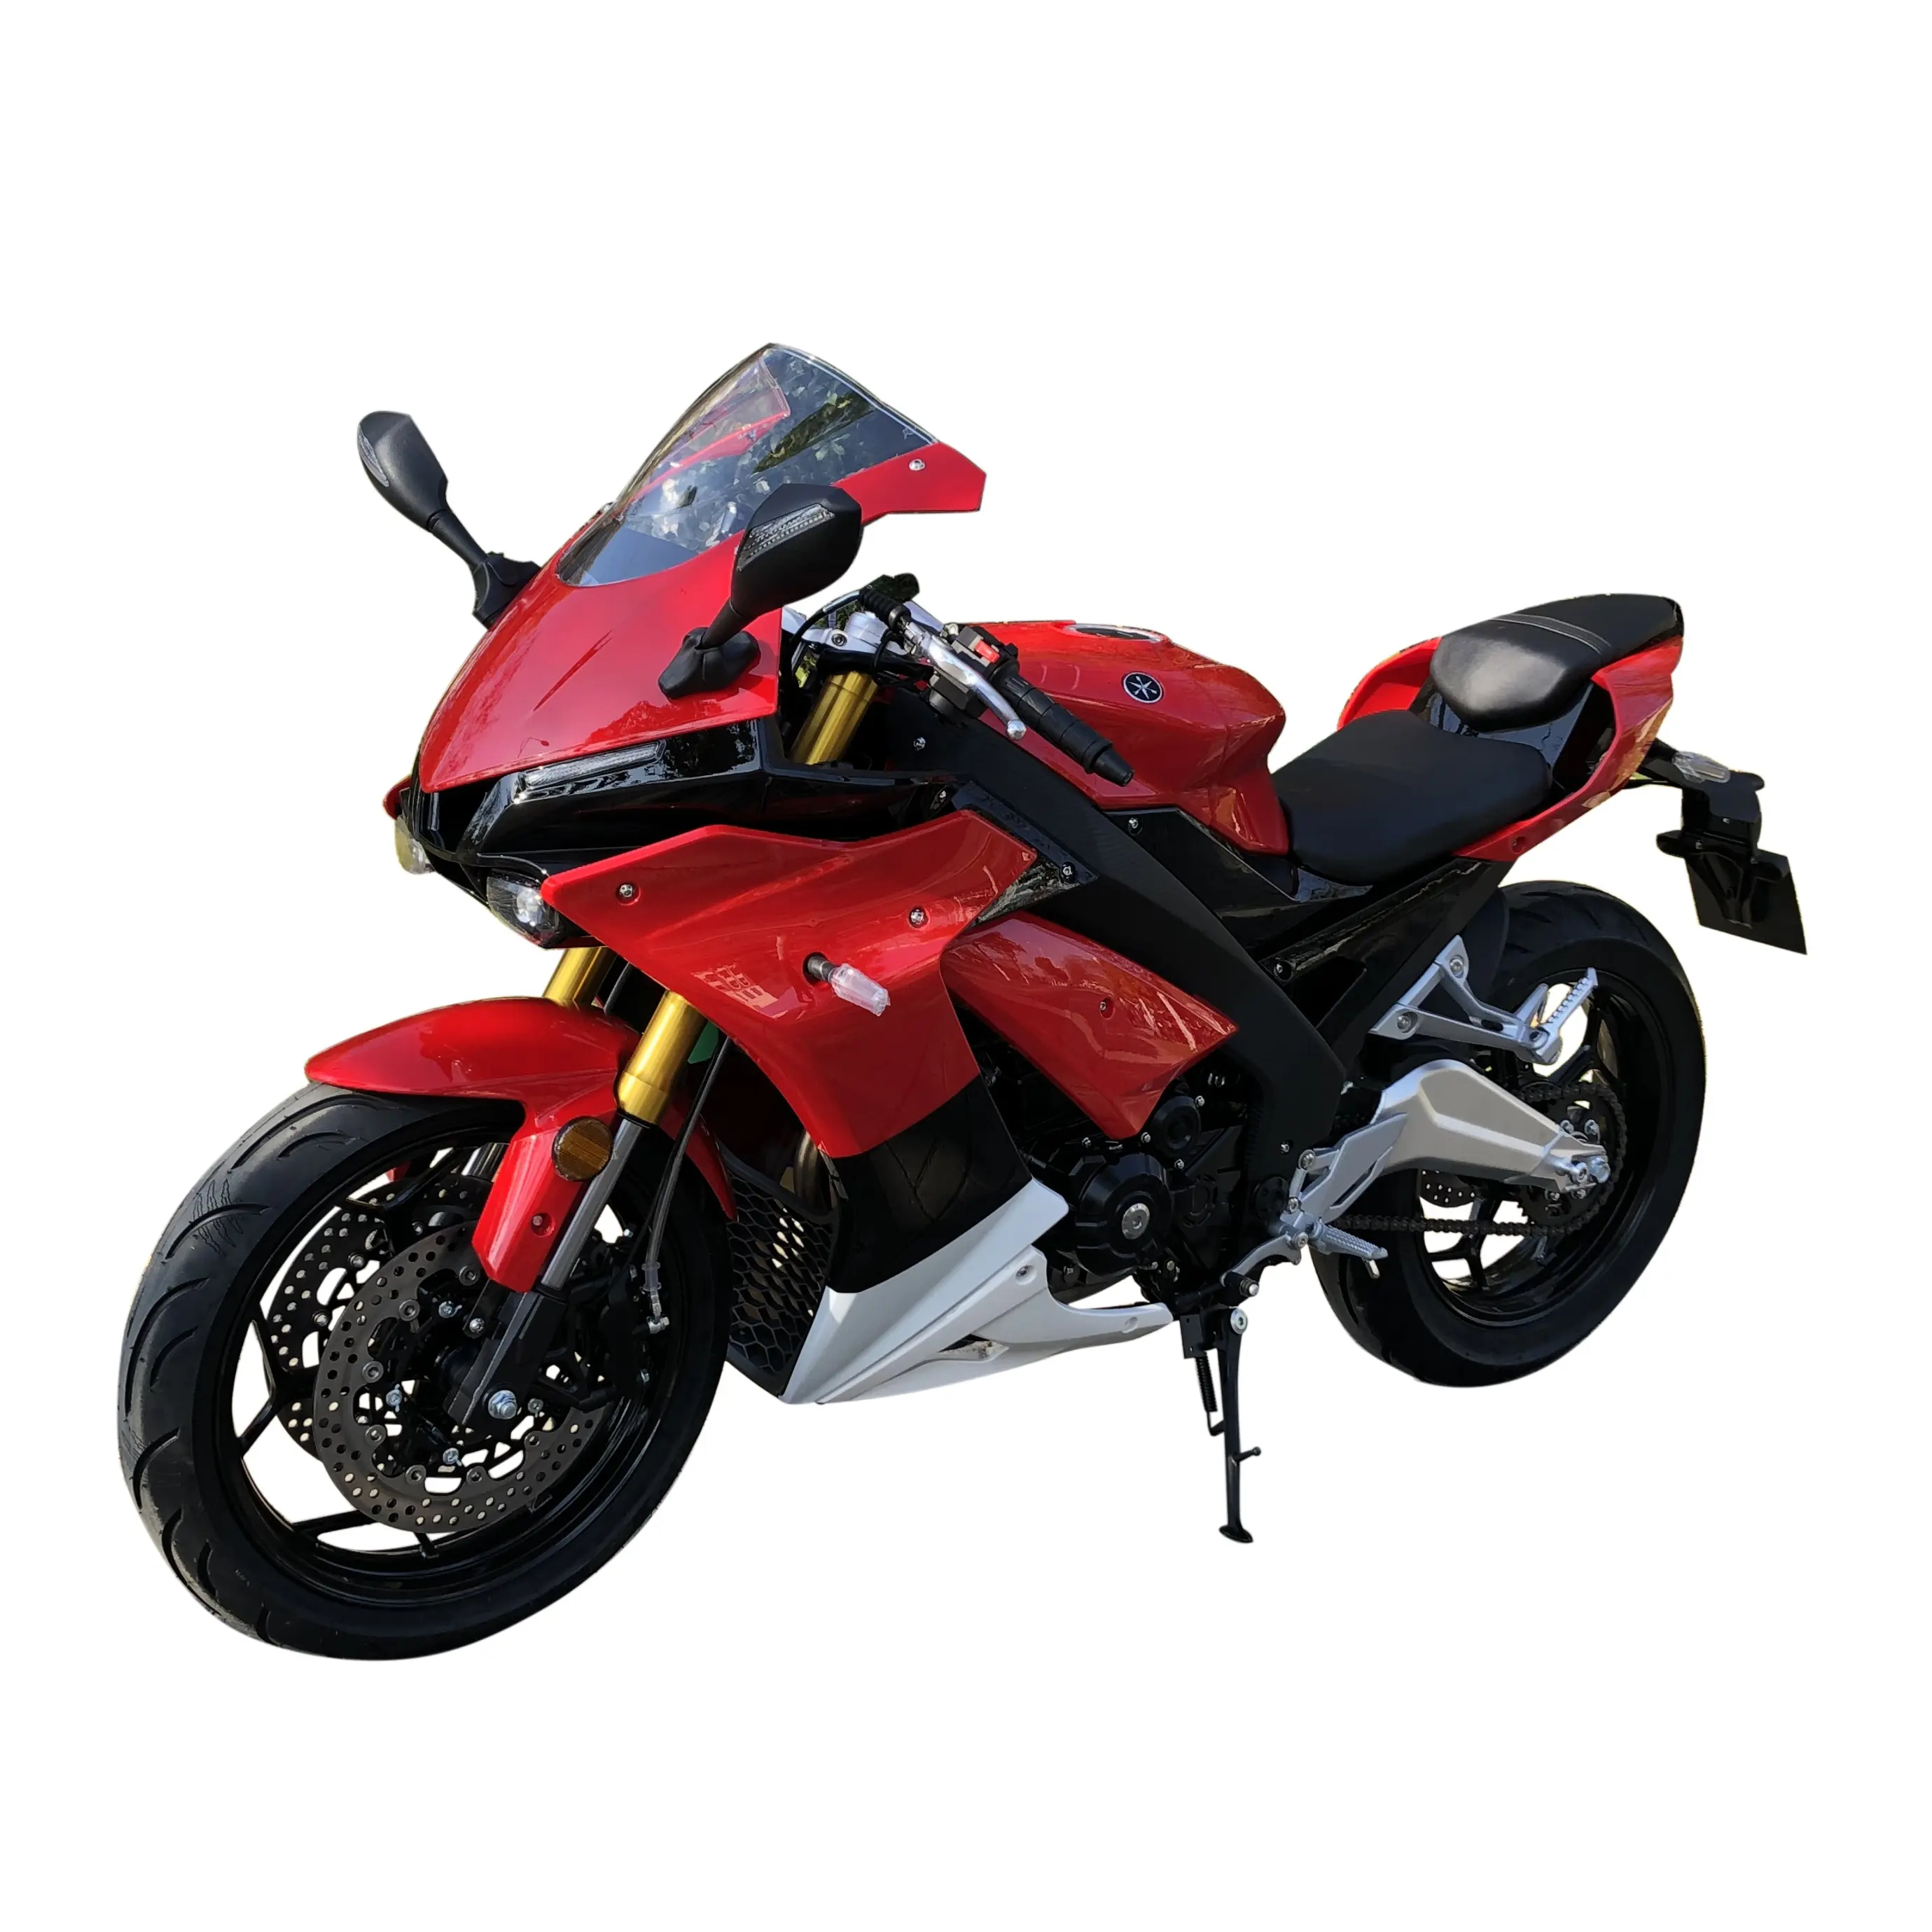 Fashion Model EEC 5 Standard R1M LIFAN NRF 250CC water cooled with EFI ABS euro 5 motorcycle